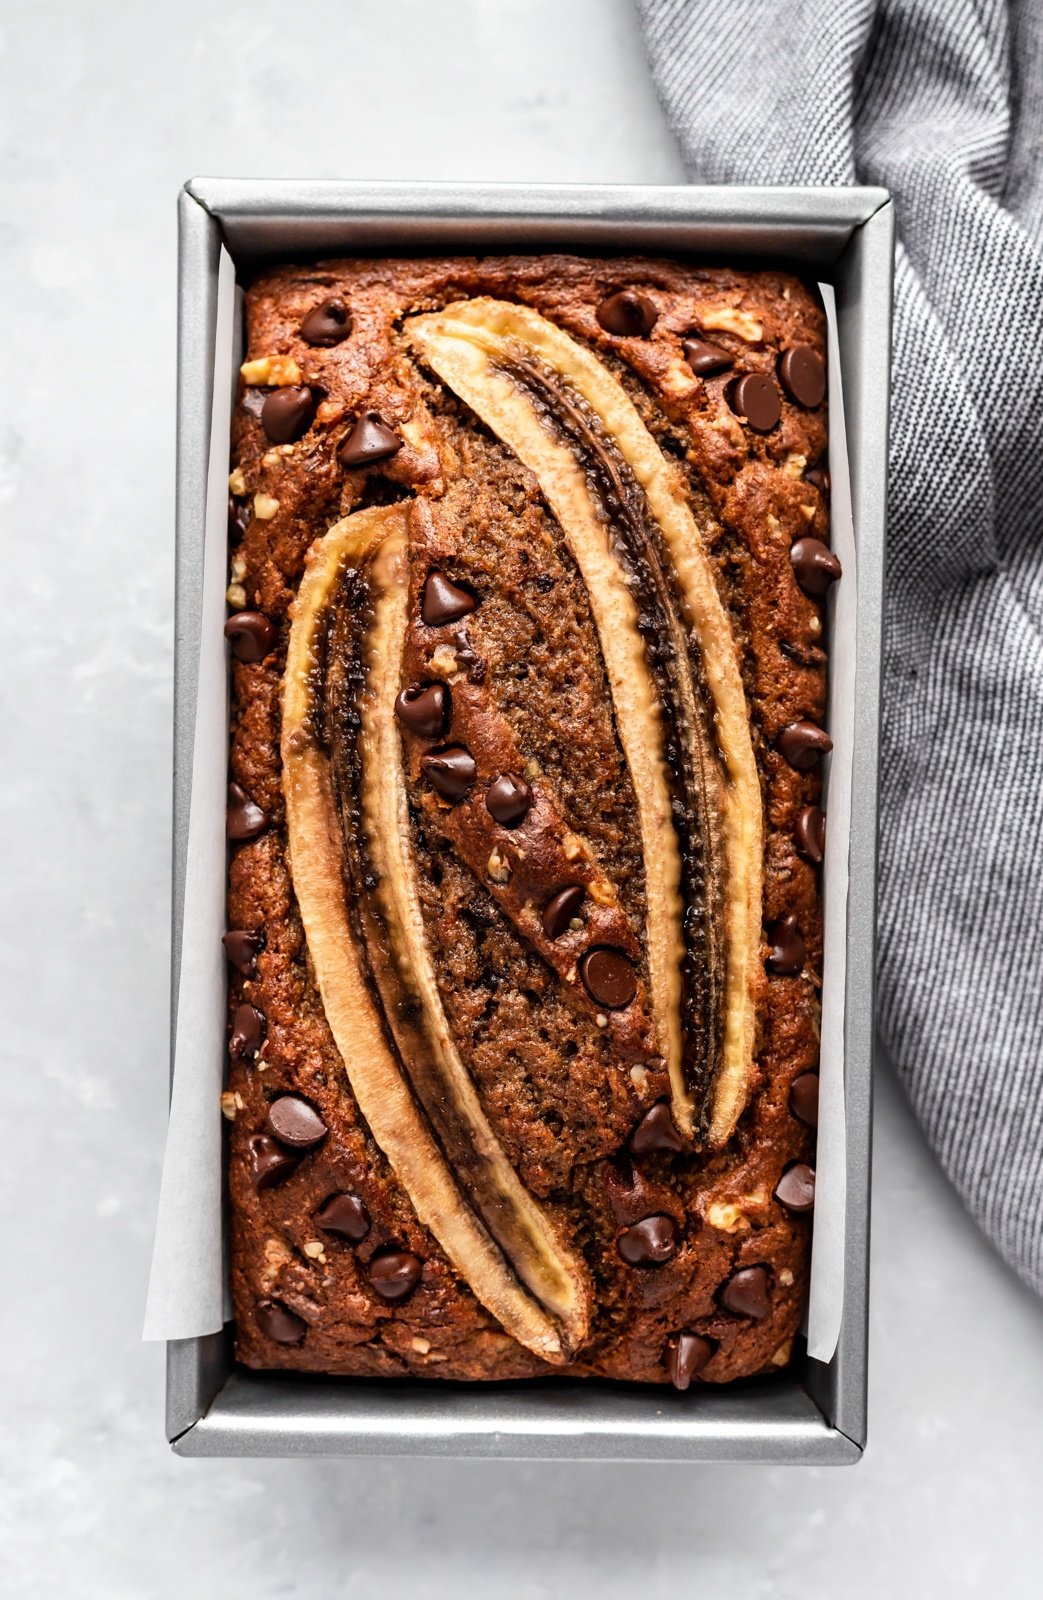 Blueberry Banana Bread Recipe: Delicious, Nutritious, and Easy to Make